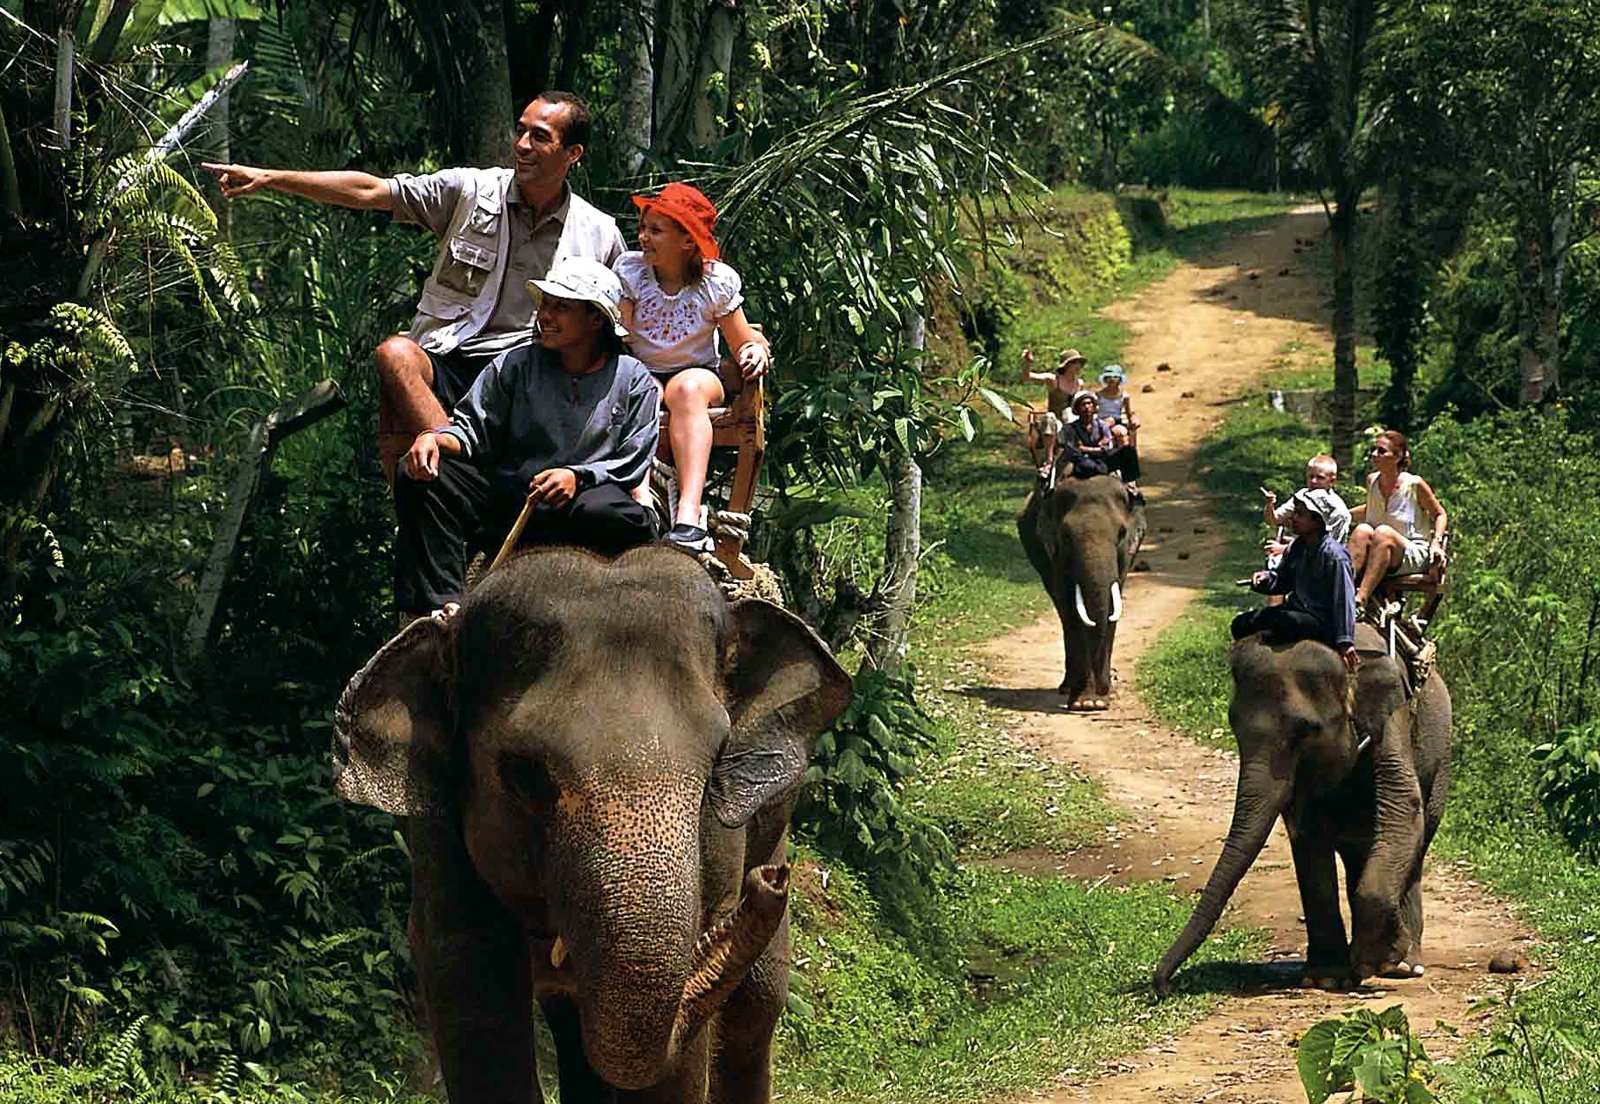 How to take an elephant ride in Bali